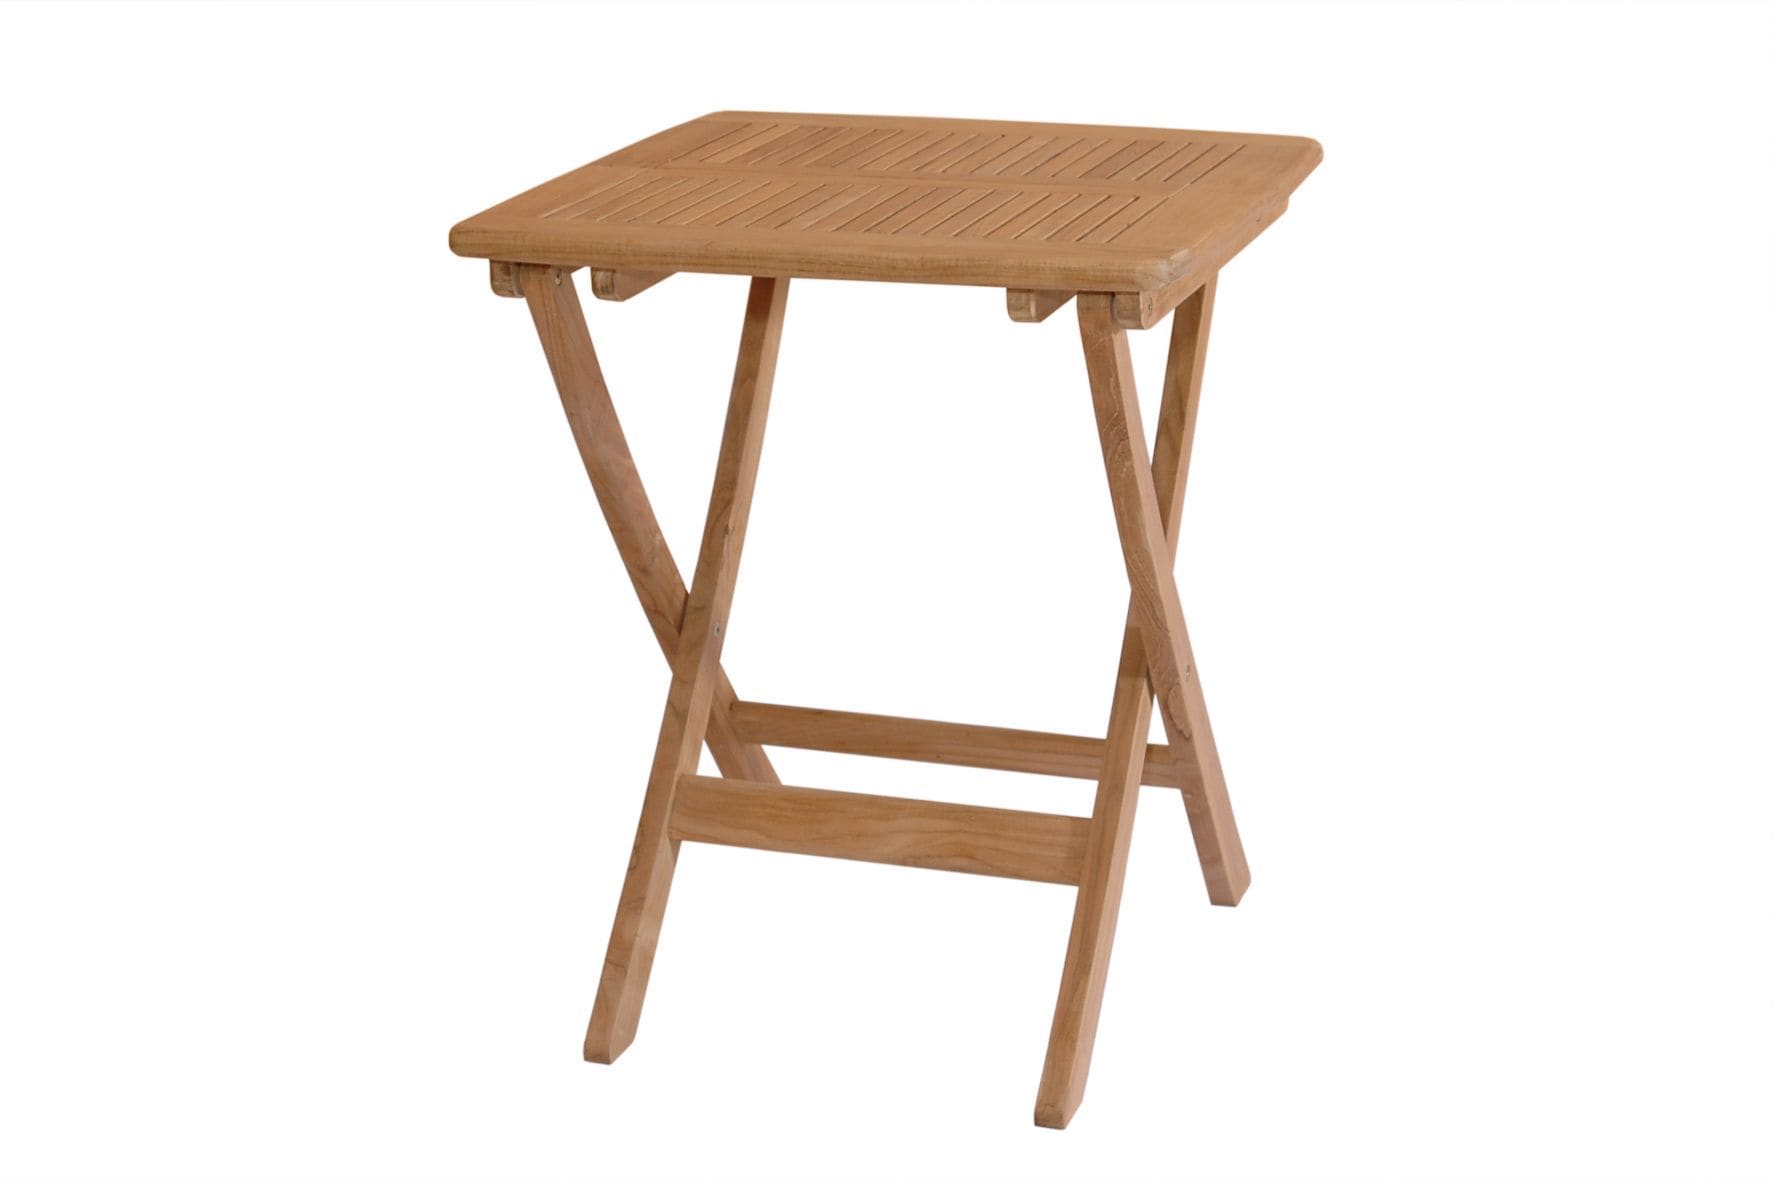 Anderson Teak Outdoor Table Anderson Teak Windsor 24" Square Picnic Folding Table